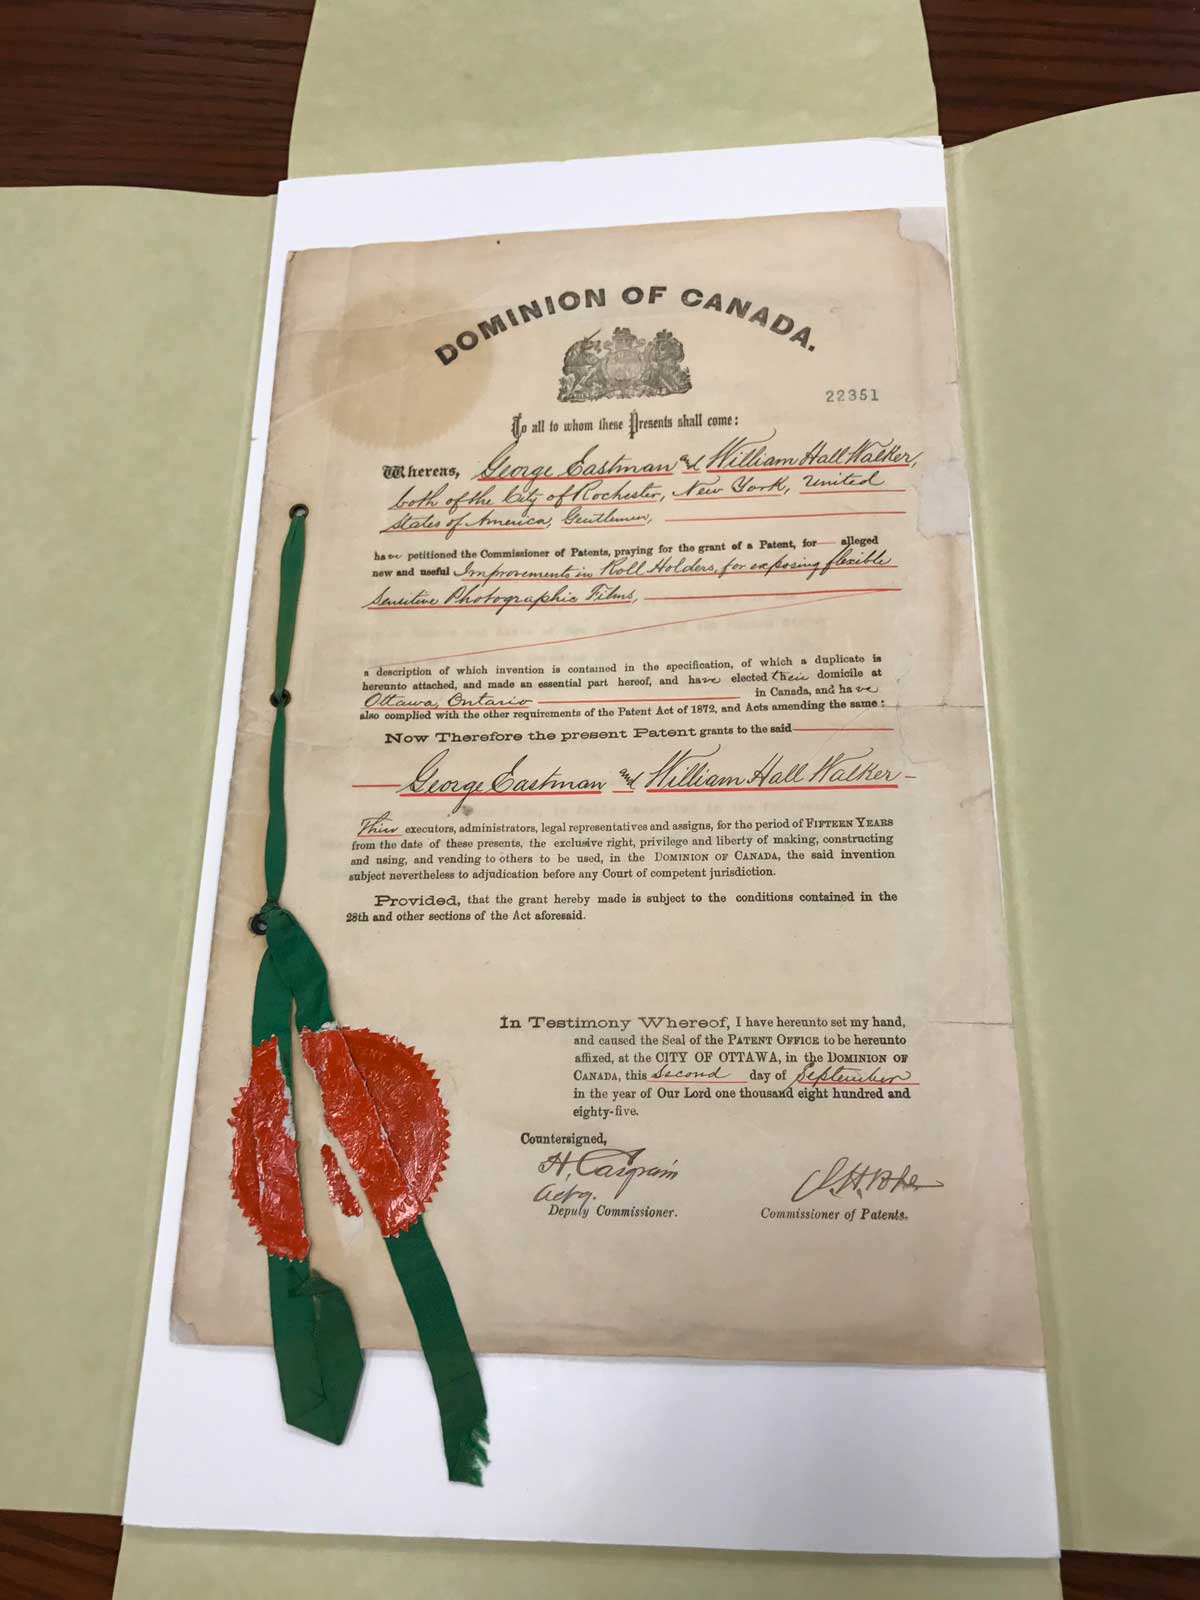 The patent document that established the Kodak technology in Canada